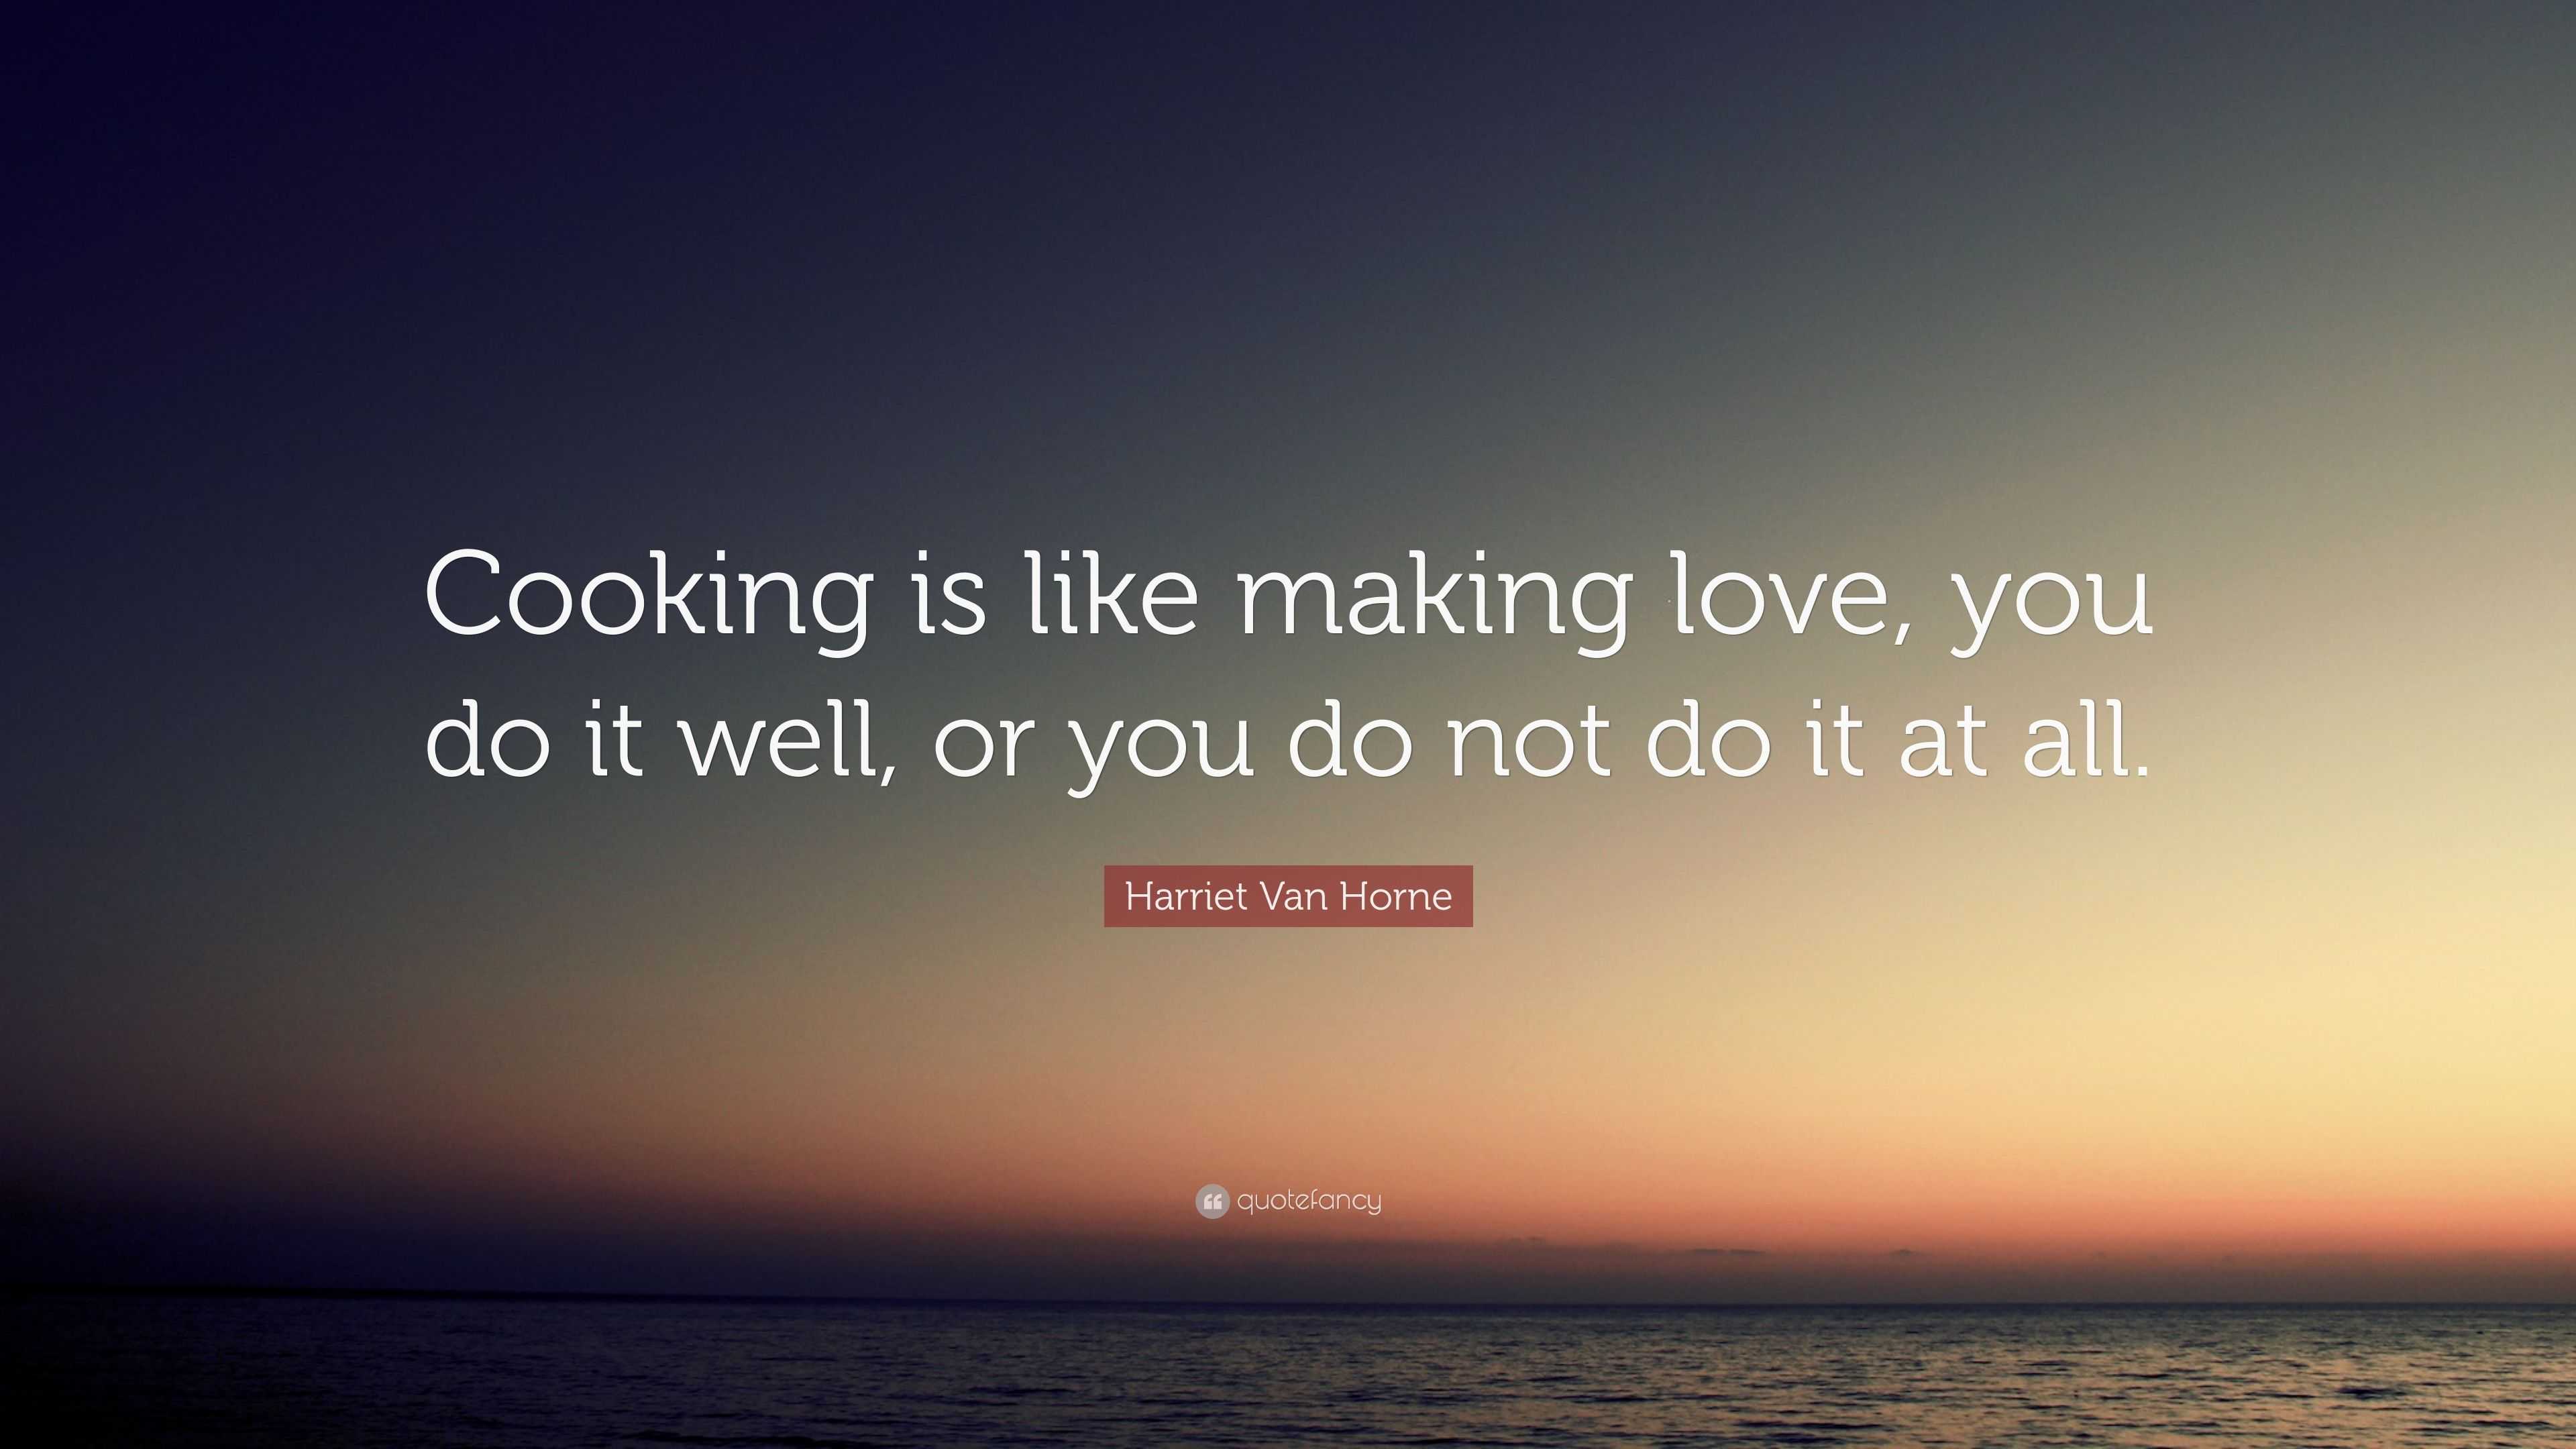 Harriet Van Horne Quote “Cooking is like making love you do it well